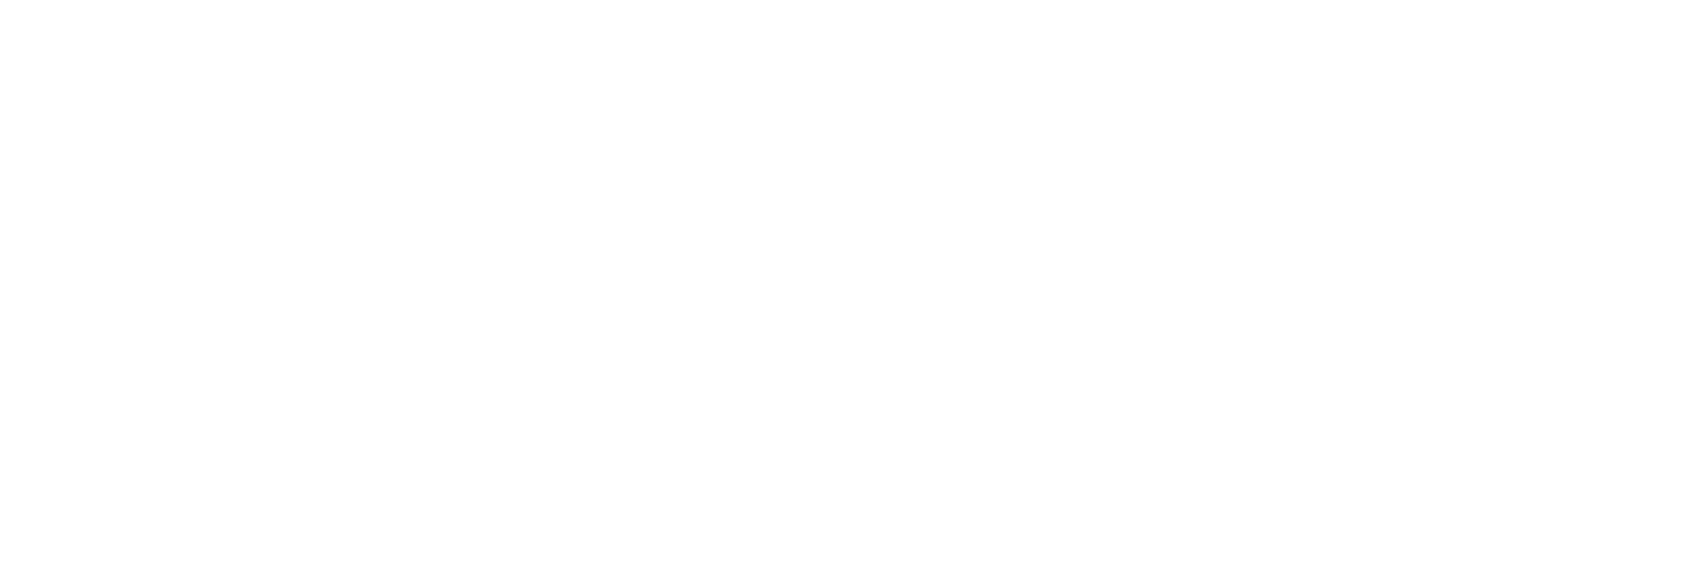 This is a musical journey traversing many different countries: Portugal, Spain, Greece, the southern coast of Italy, and even Turkey. Instead of arranging the programme according to genre, or moving steadily from one country to another, we literally travel